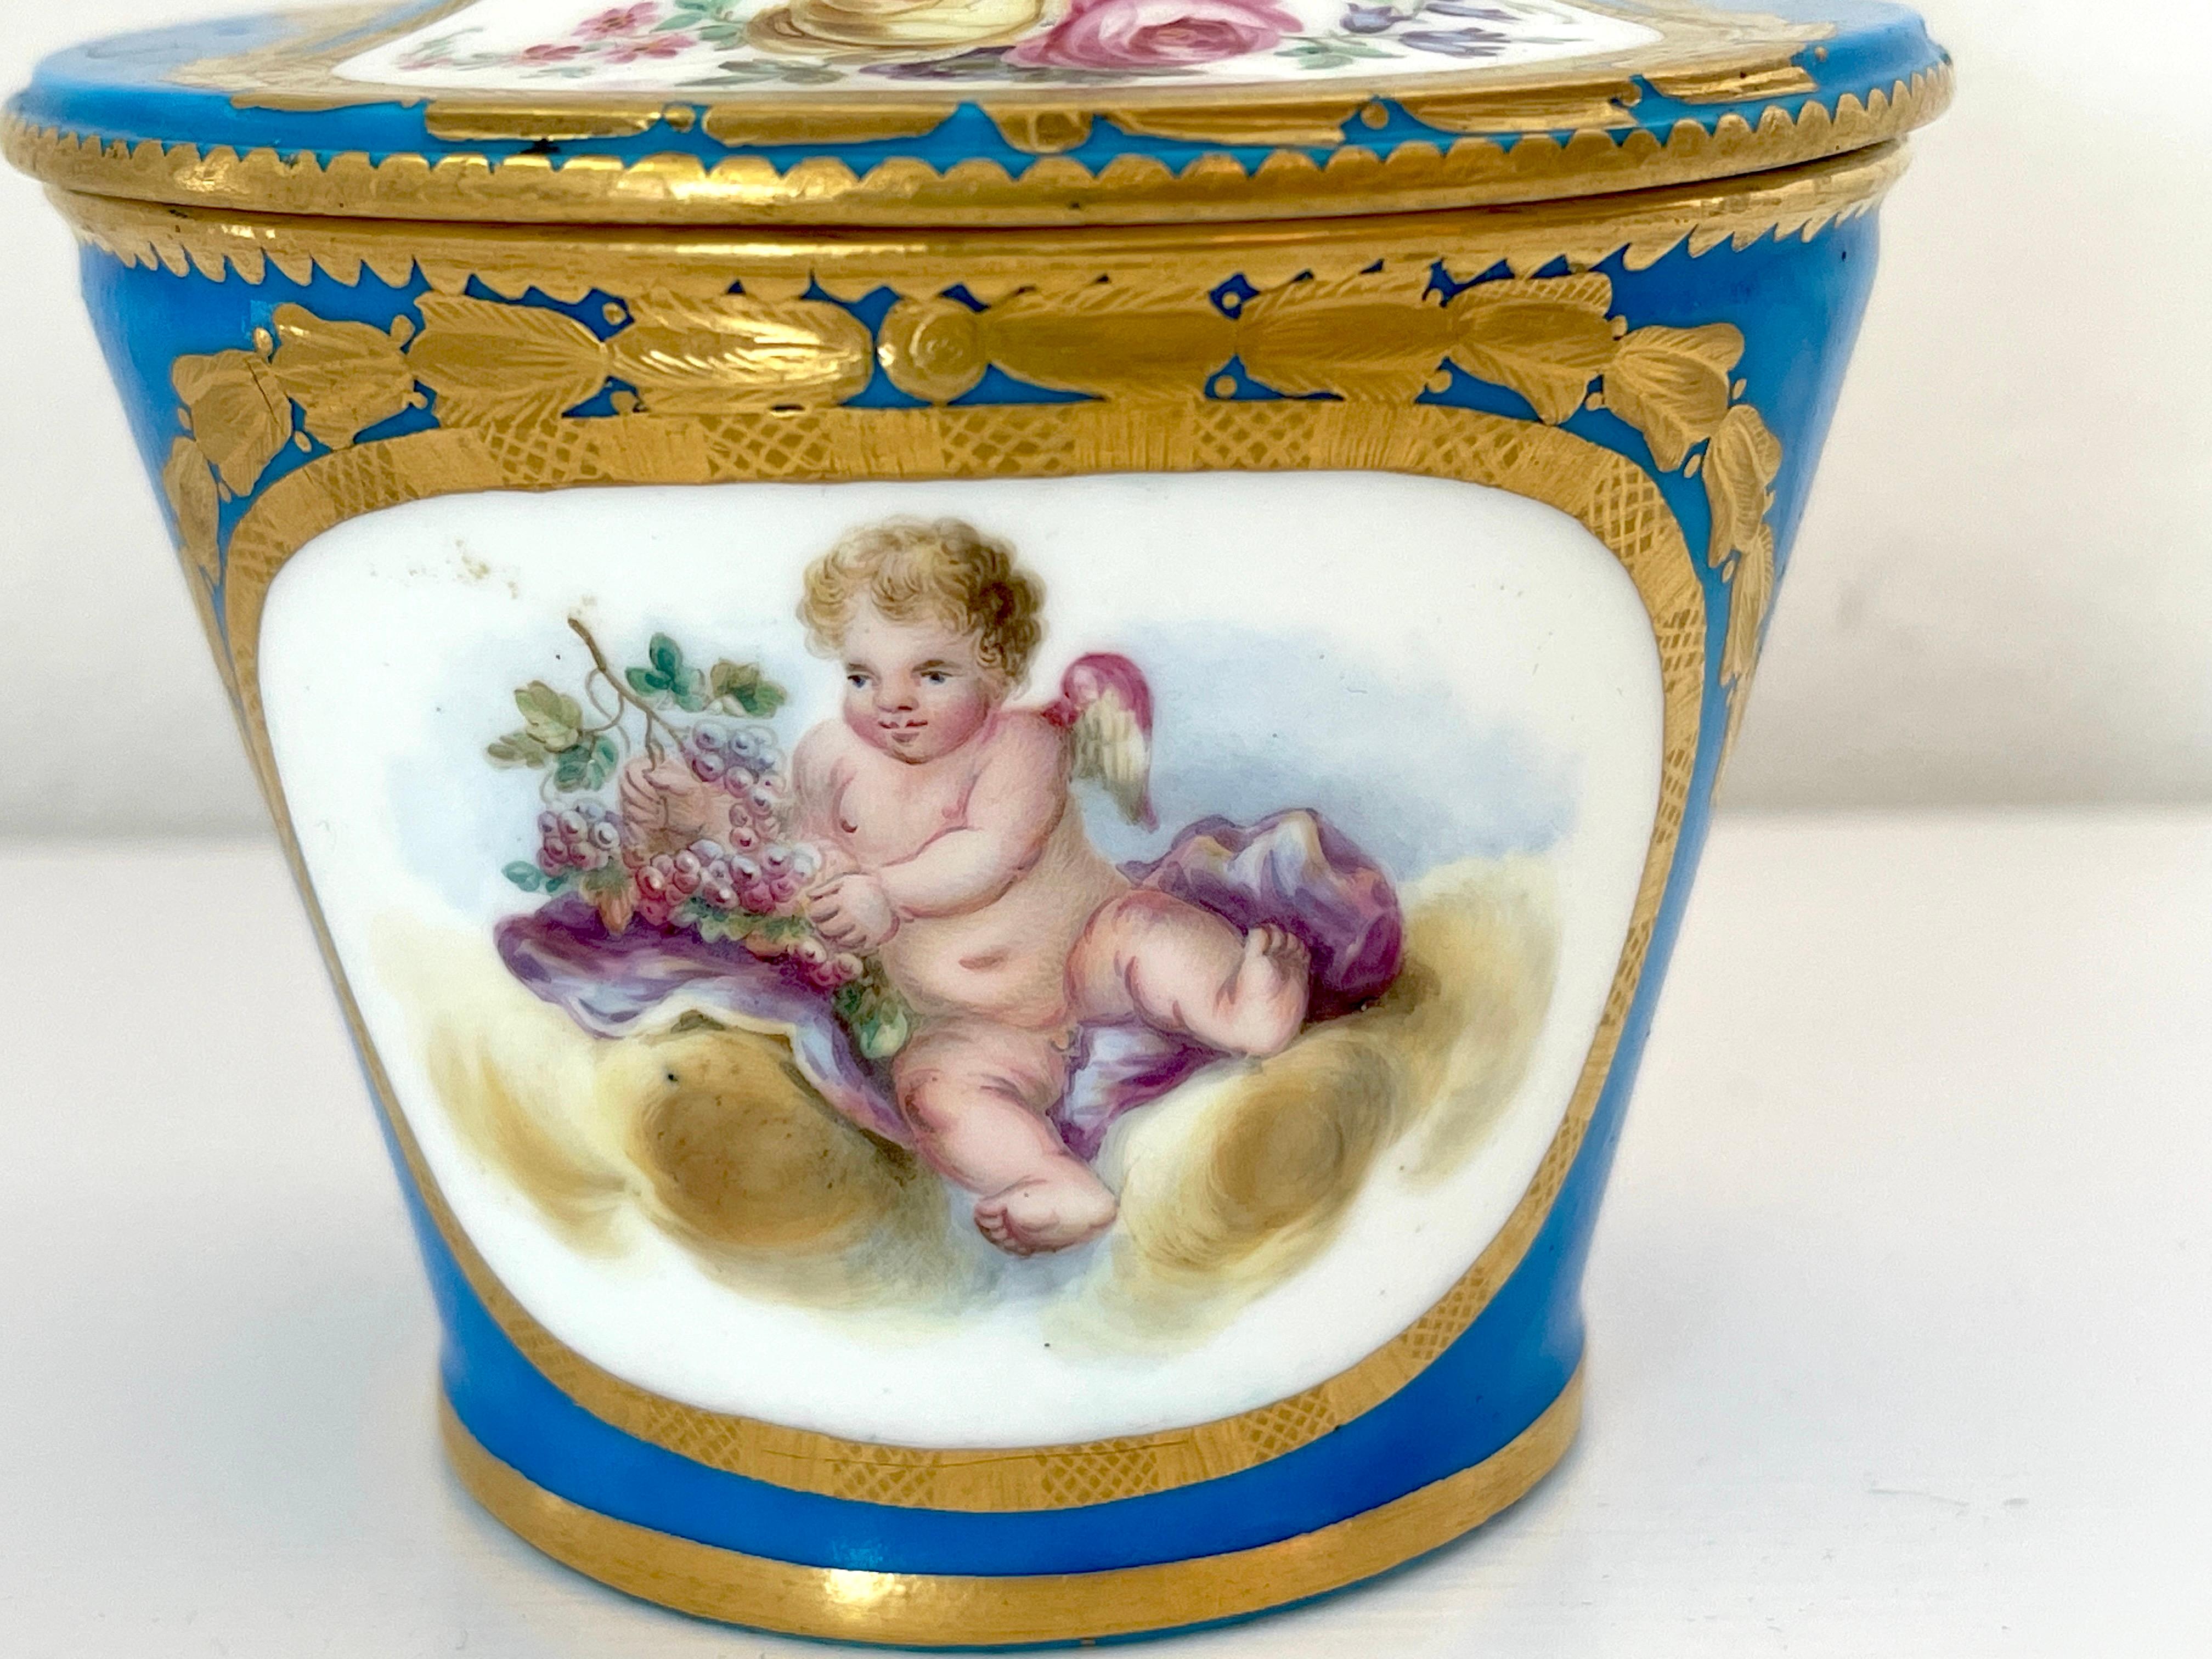 18th Century Sevres Blue Celeste Putti Motif Sugar Box 1767, Special Order
With an uncommon interlaced L mark in gold, Date letter O, with painter/gilder marks 
Its been suggested the gold Sevres mark denotes a special order. 

We are pleased to